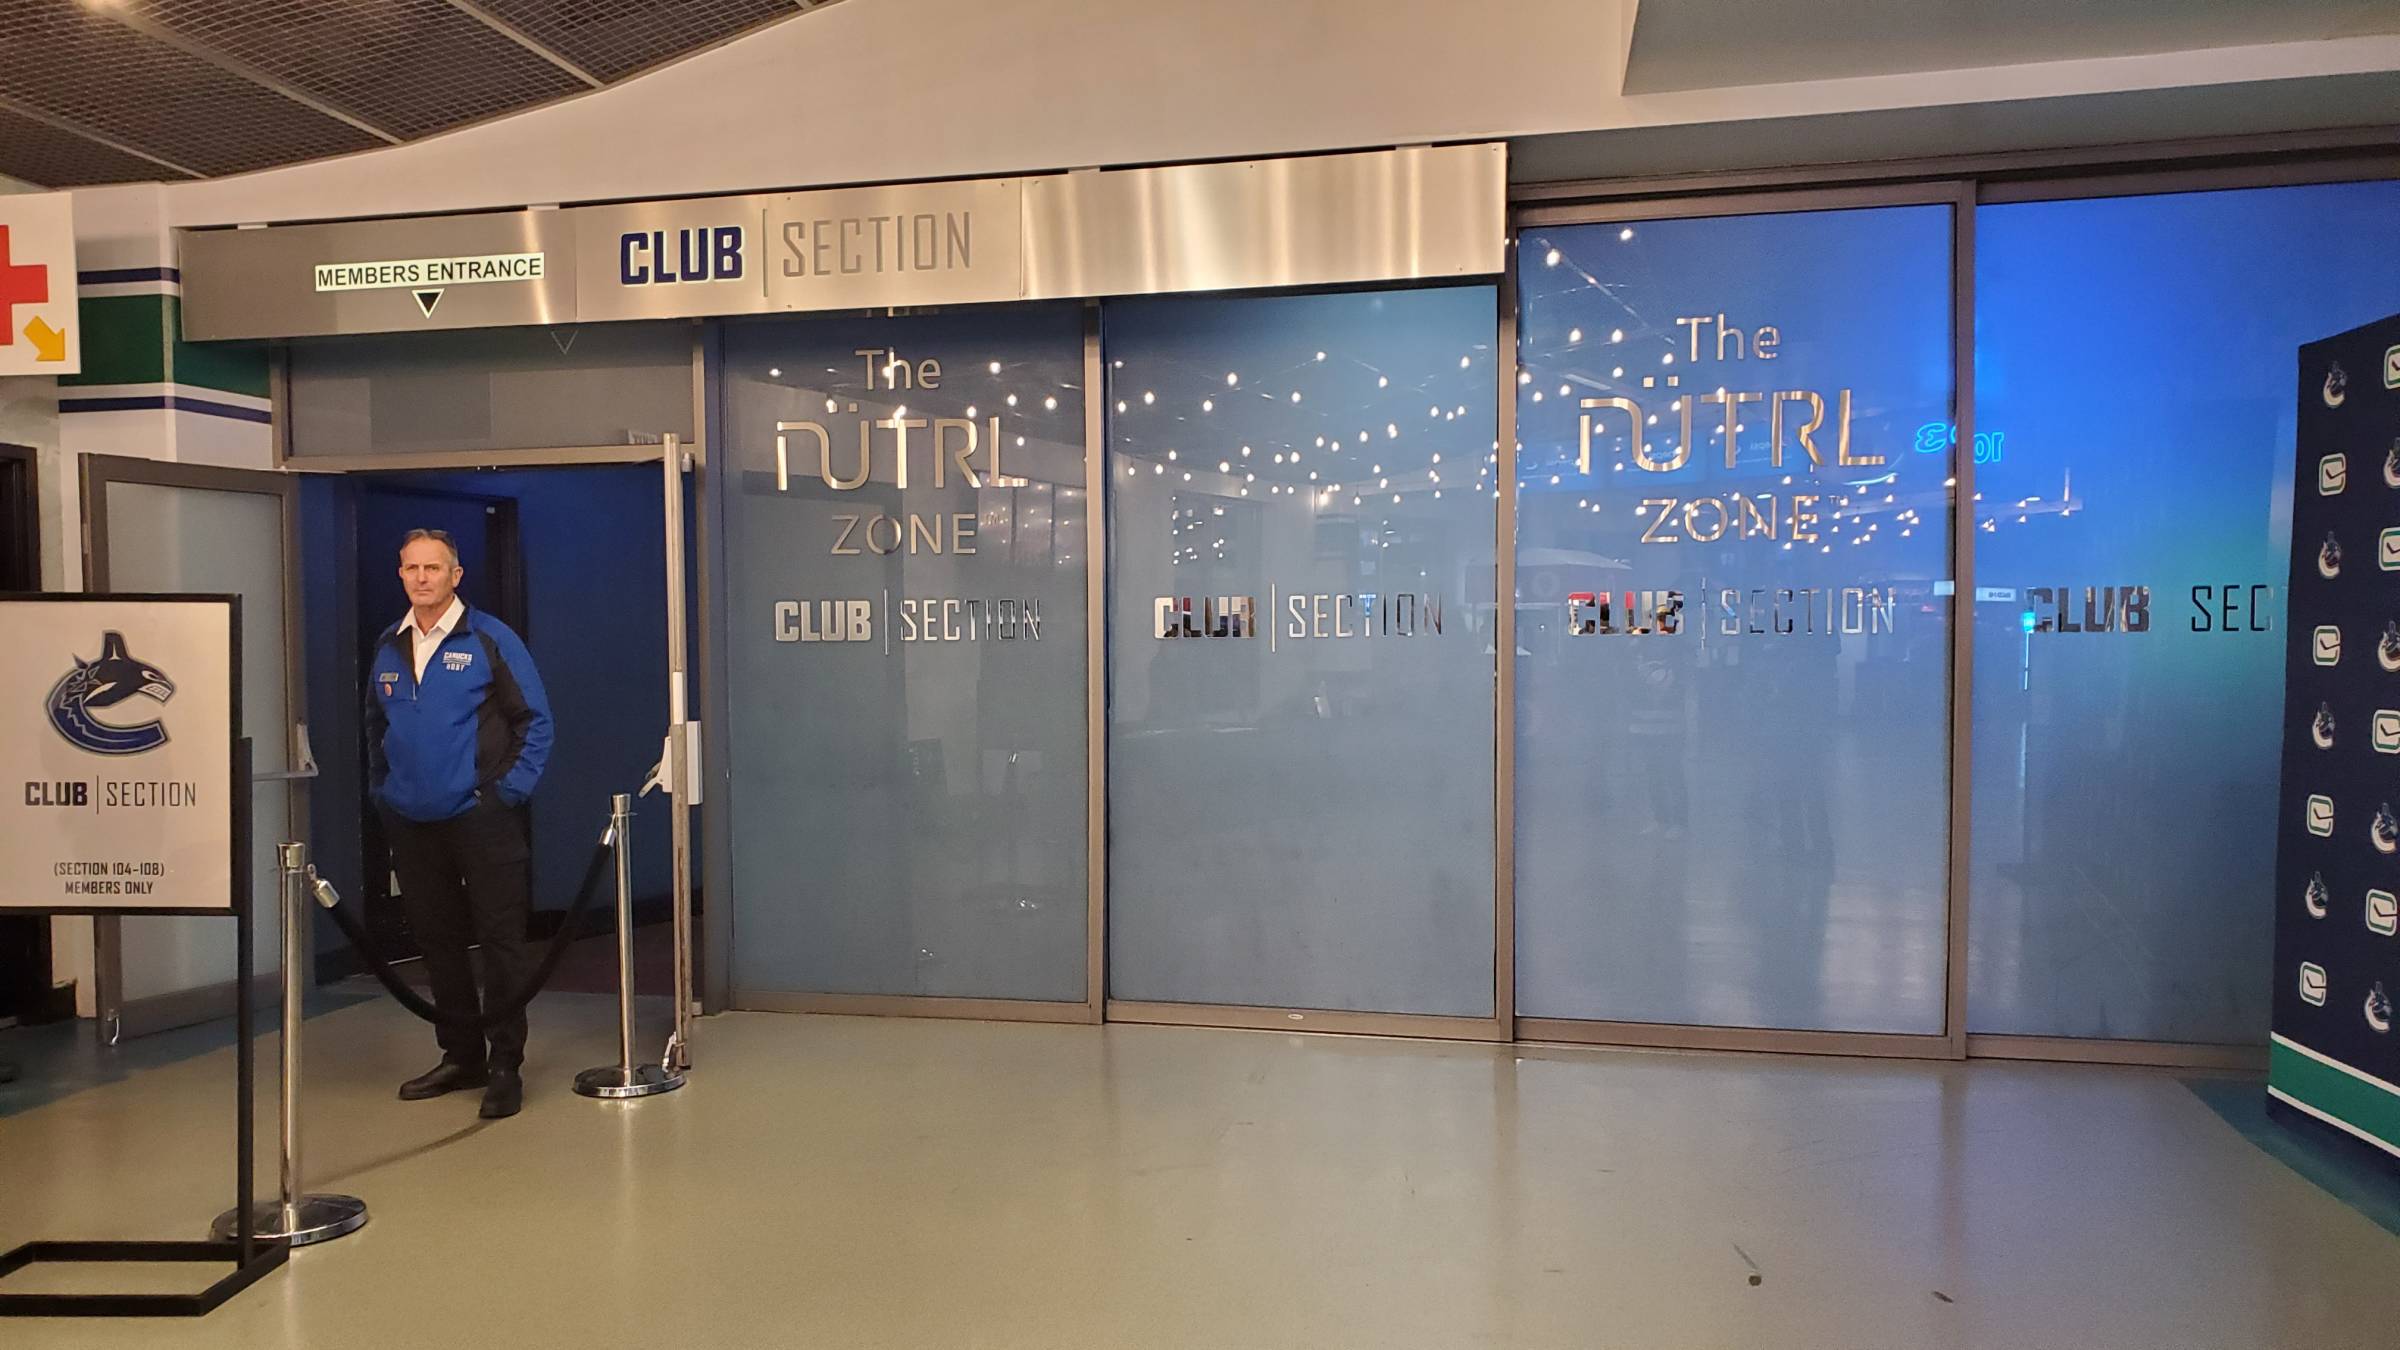 The Nutrl Zone Club Section Entrance at Rogers Arena